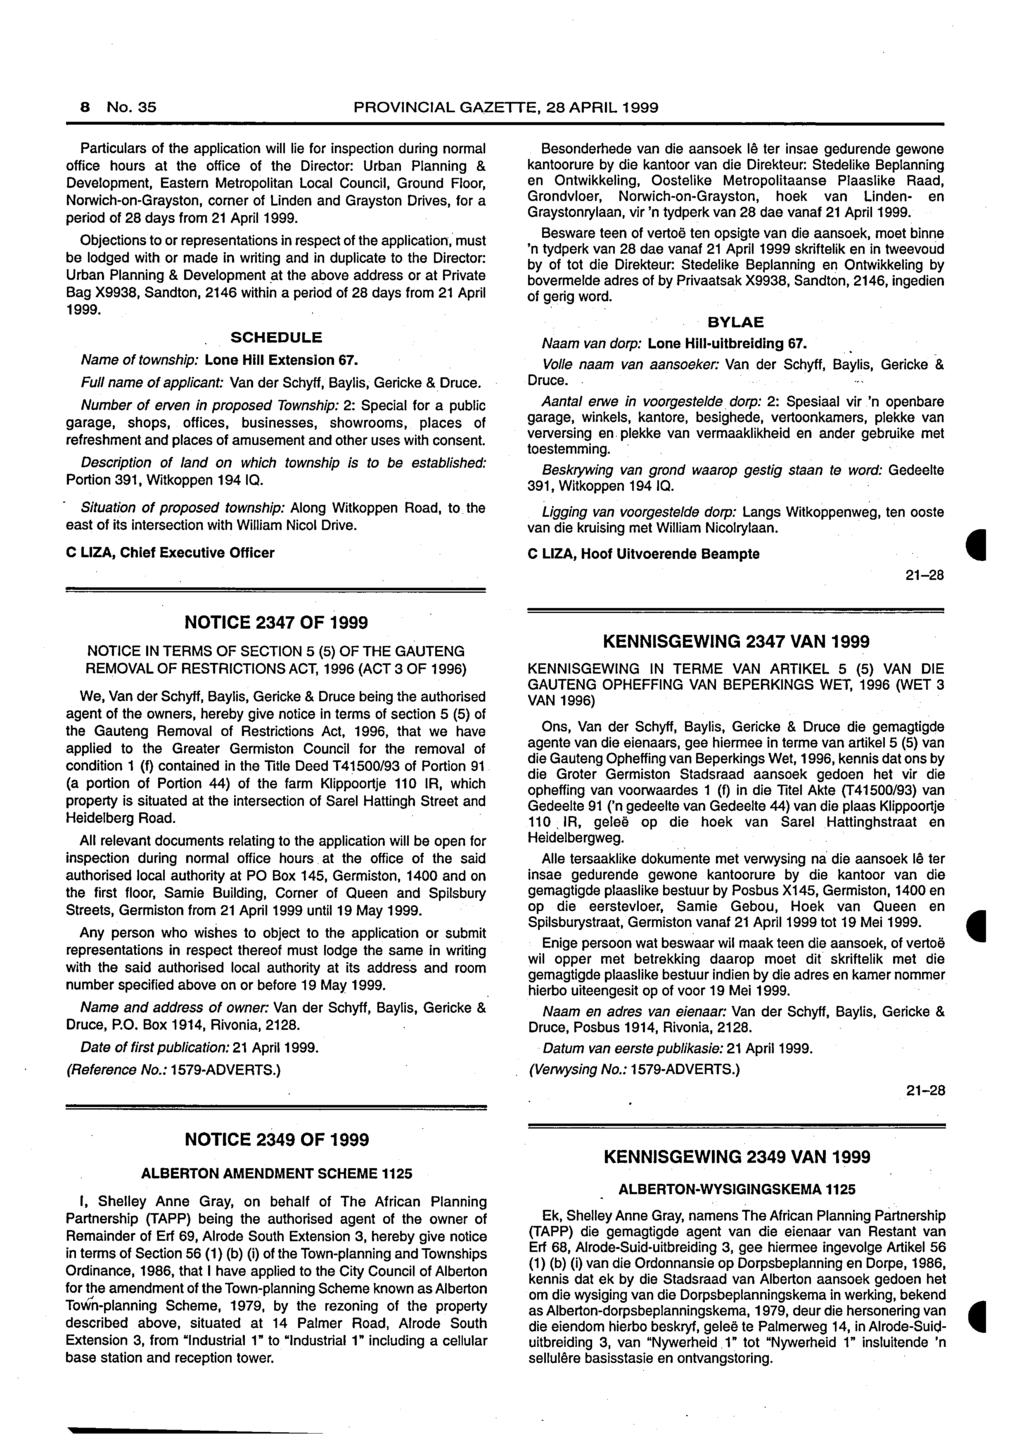 8 No. 35 PROVINCIAL GAZETTE, 28 APRIL 1999 office hours at the office of the Director: Urban Planning & Development, Eastern Metropolitan Local Council, Ground Floor, Norwich-on-Grayston, corner of